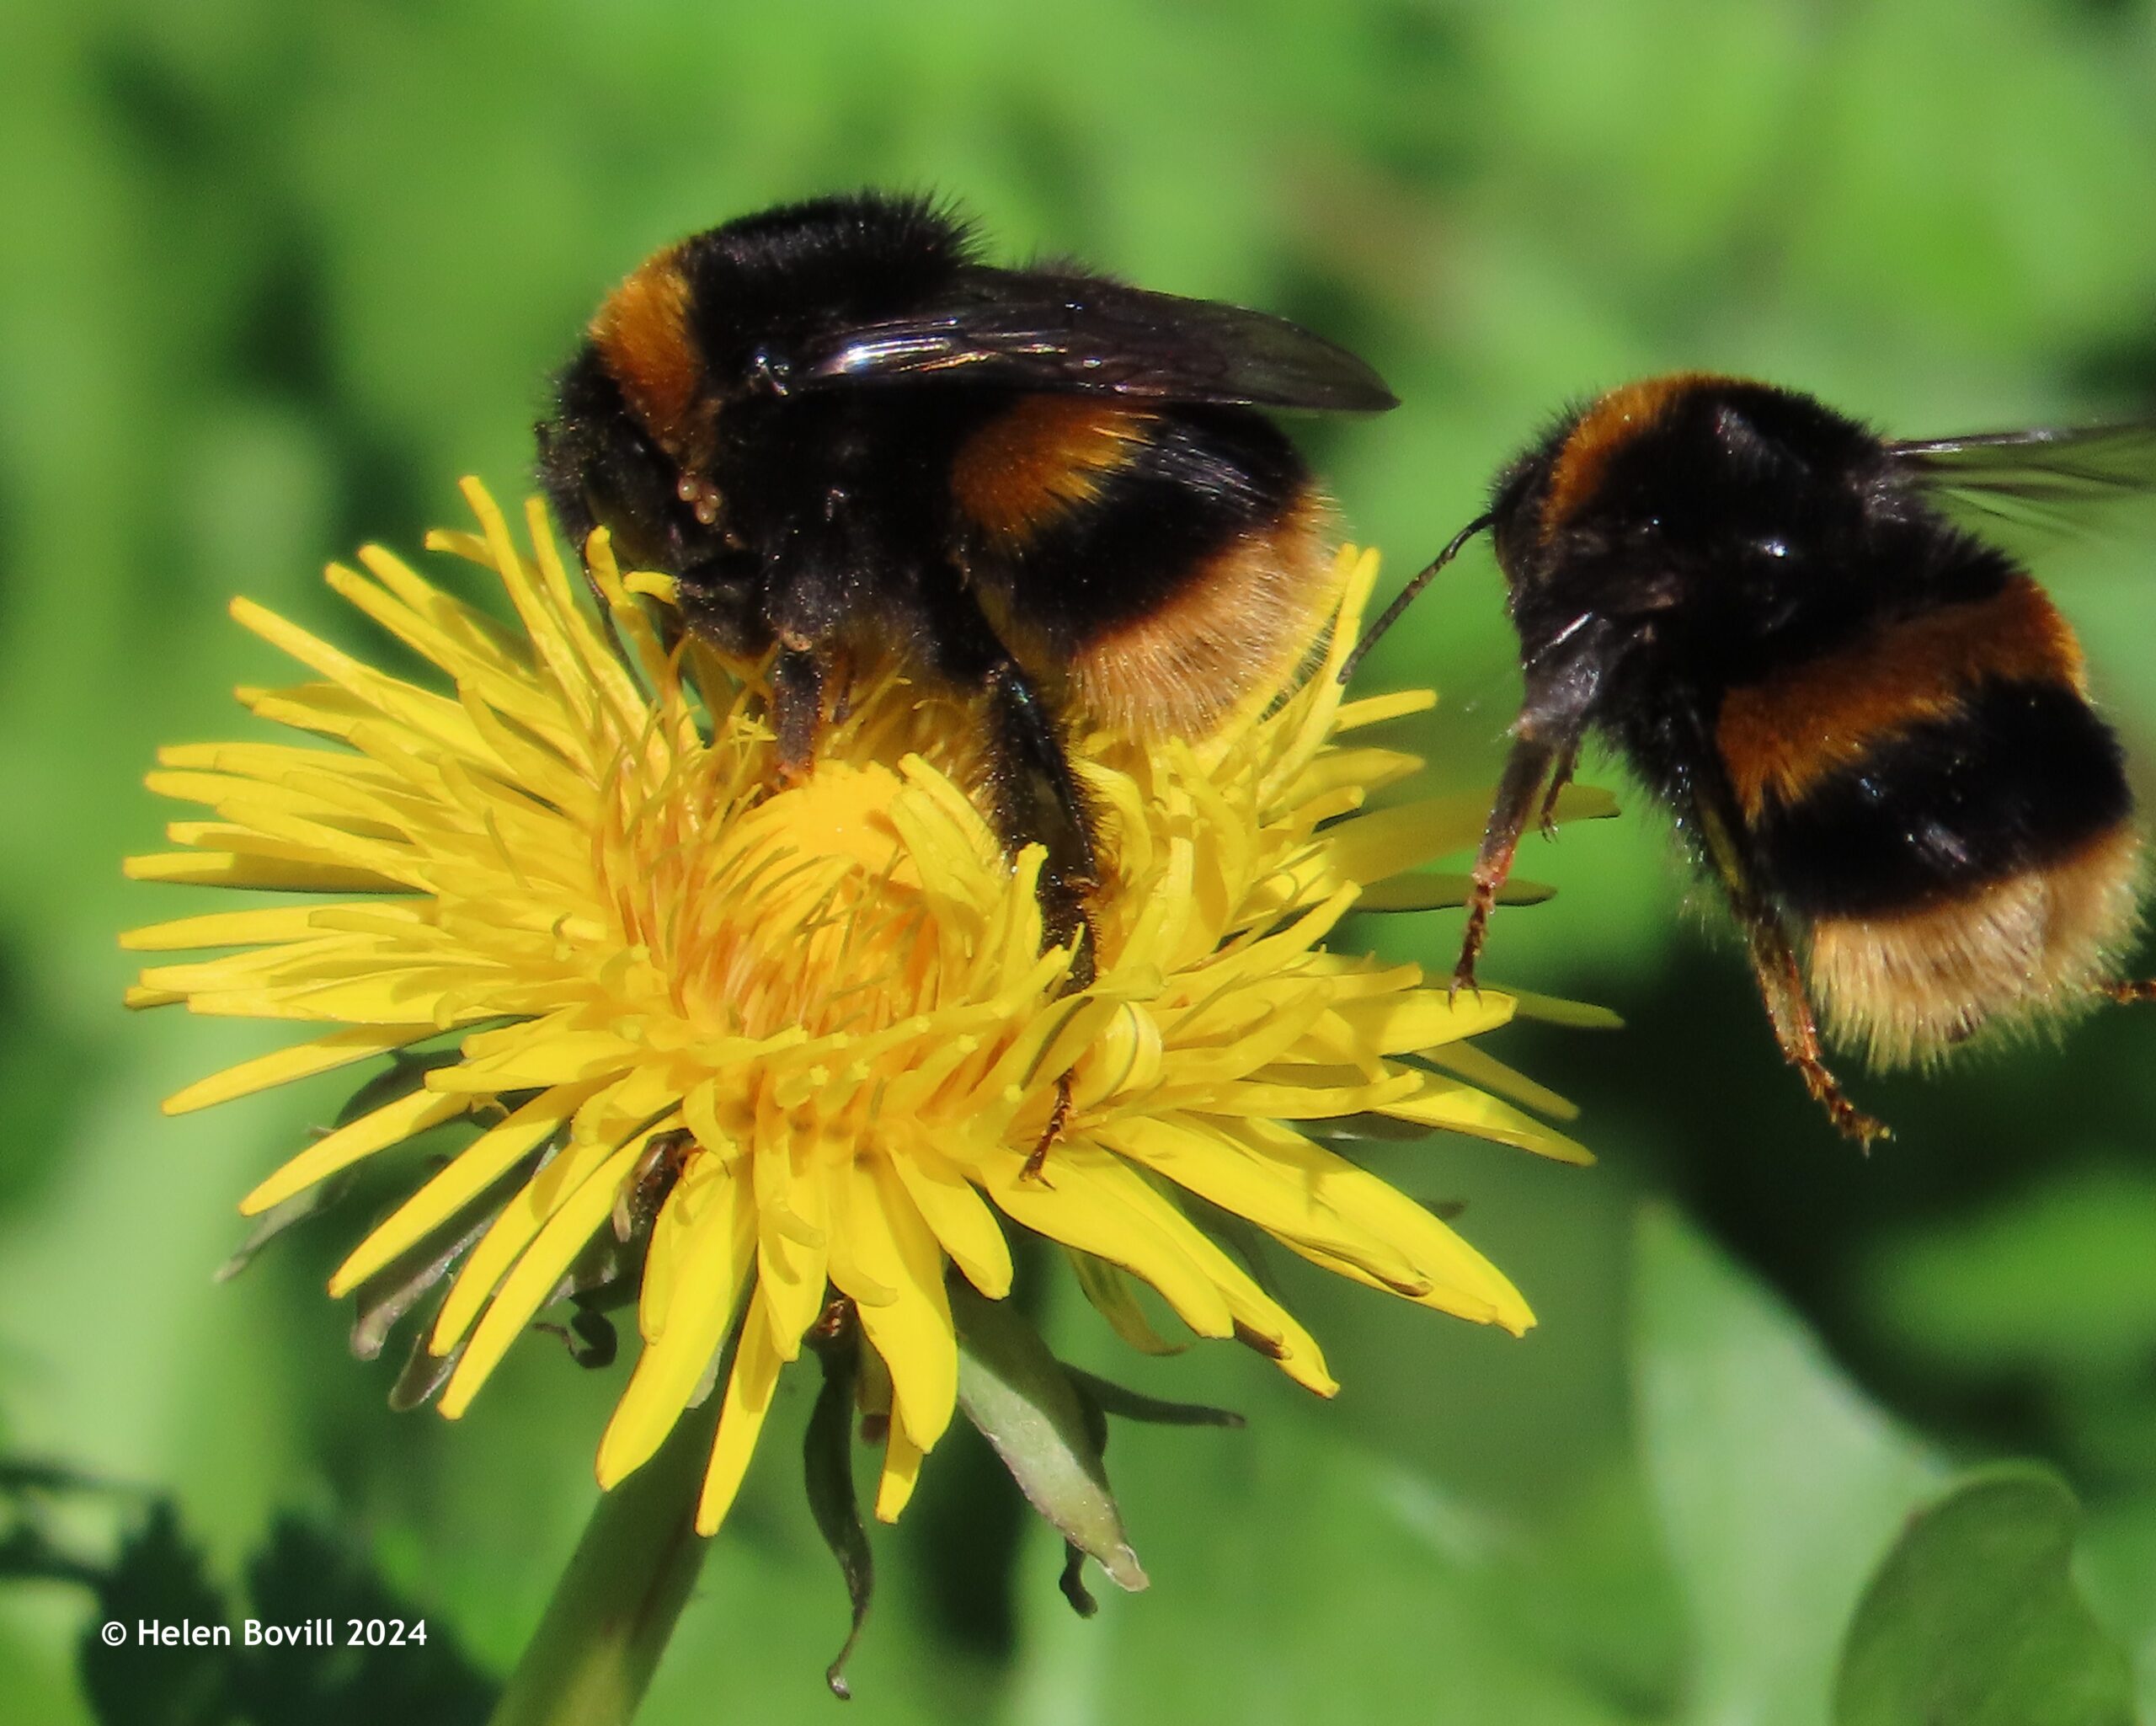 Two buff-tailed bumblebees - one on a dandelion, the other in flight